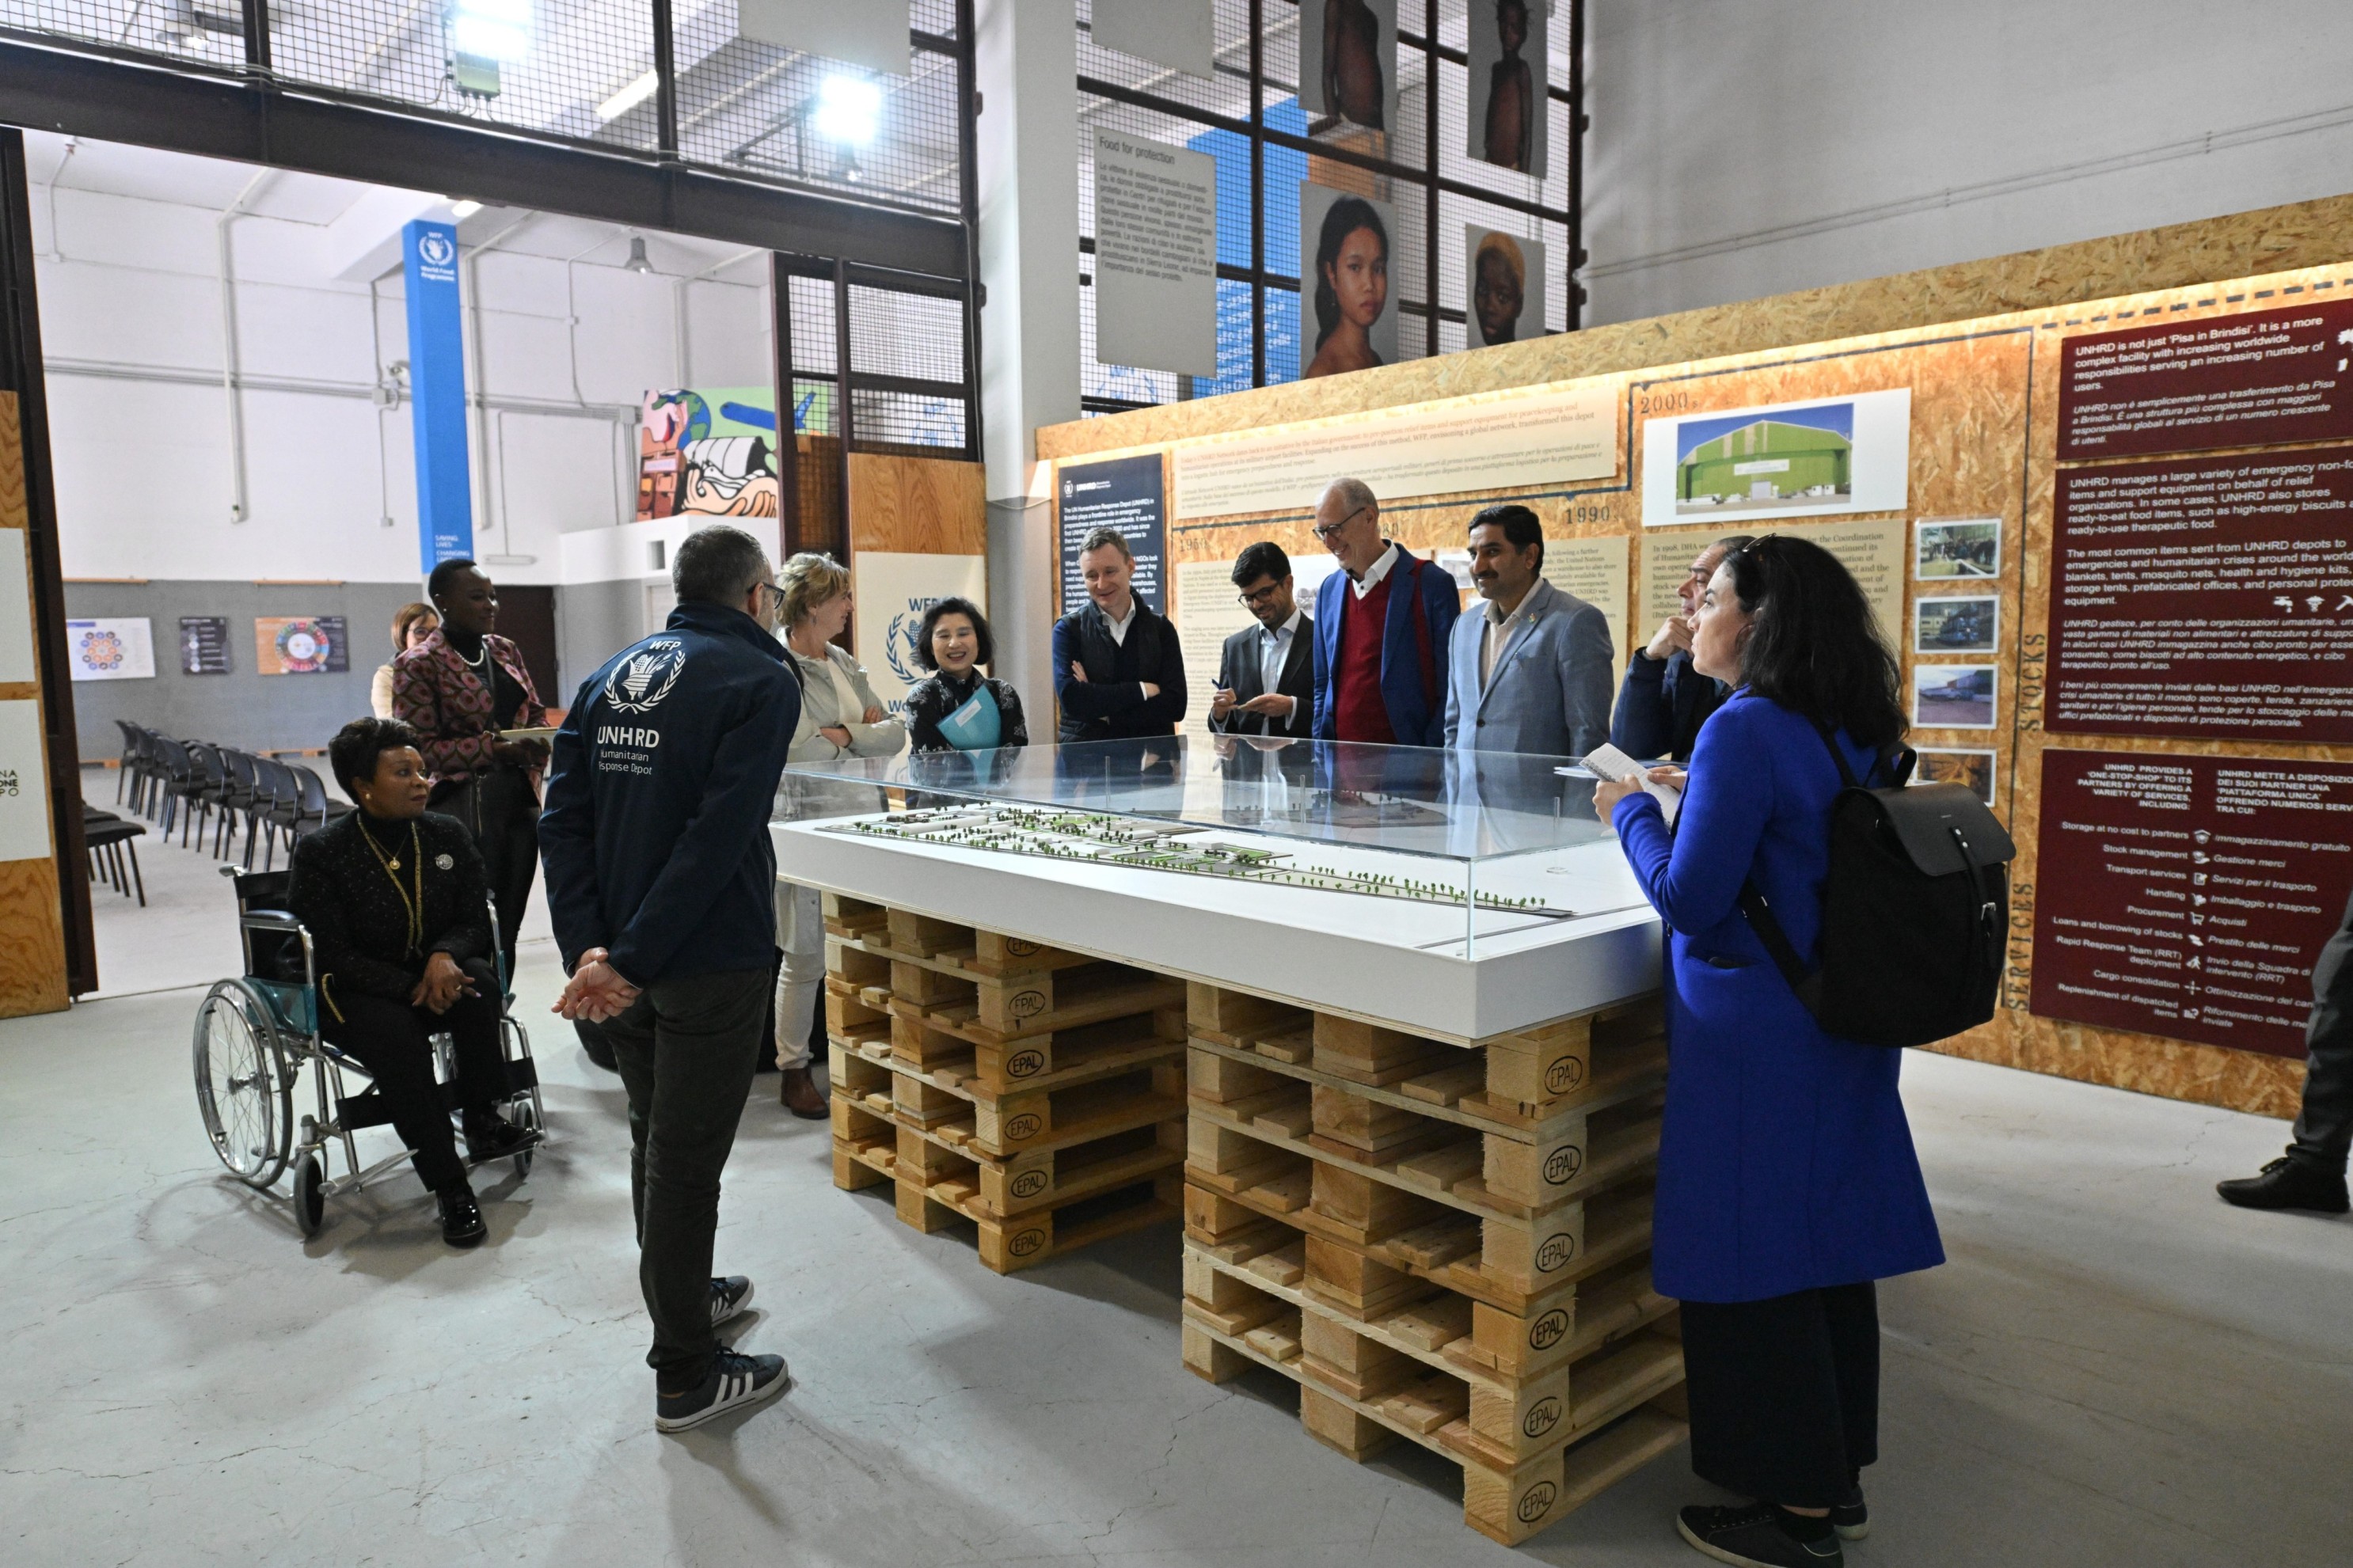 Figure 3: Visit to the UNHRD Museum, where the delegation learned about the upgrade and expansion plan for the Hub around a 3D model of the site  